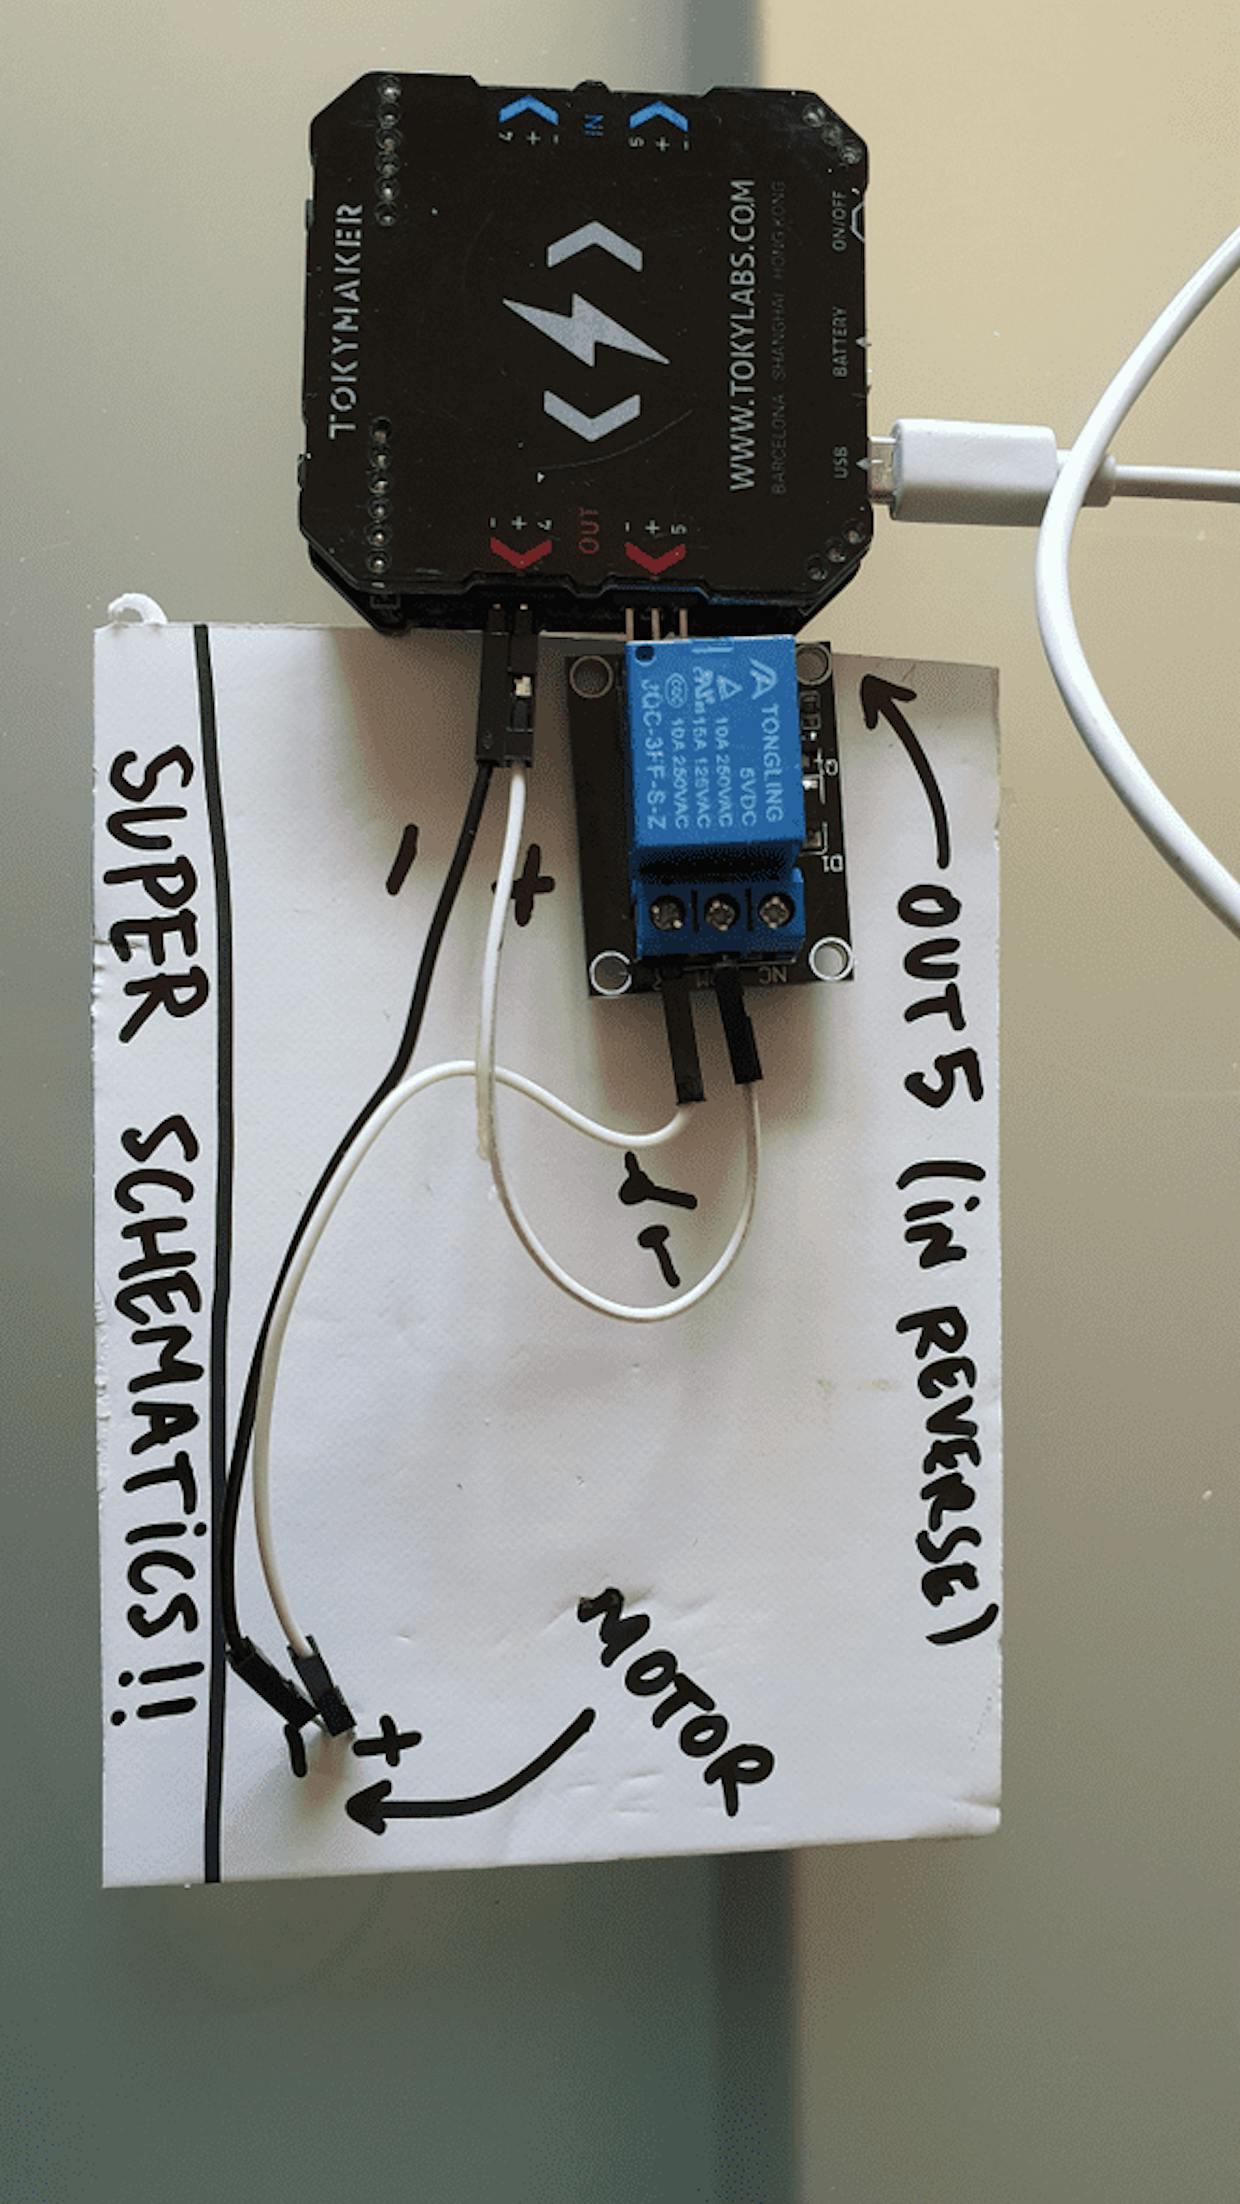 Tokymaker connected to a relay